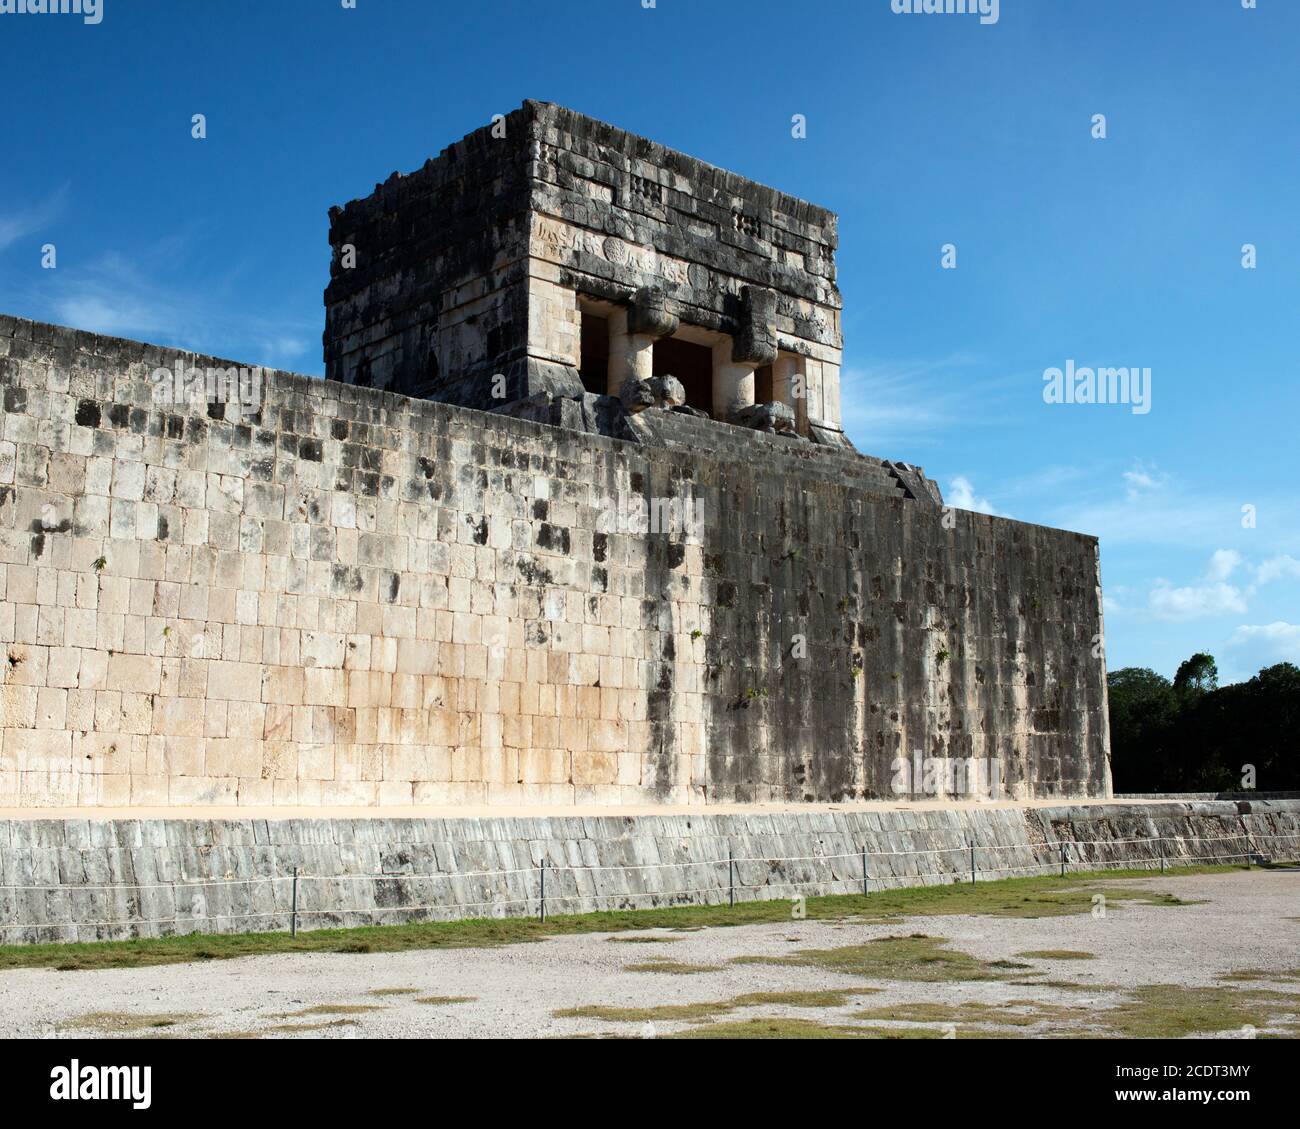 A temple at the ancient Maya archaeological site of Chichén Itzá, Yucatán State, Mexico. Stock Photo